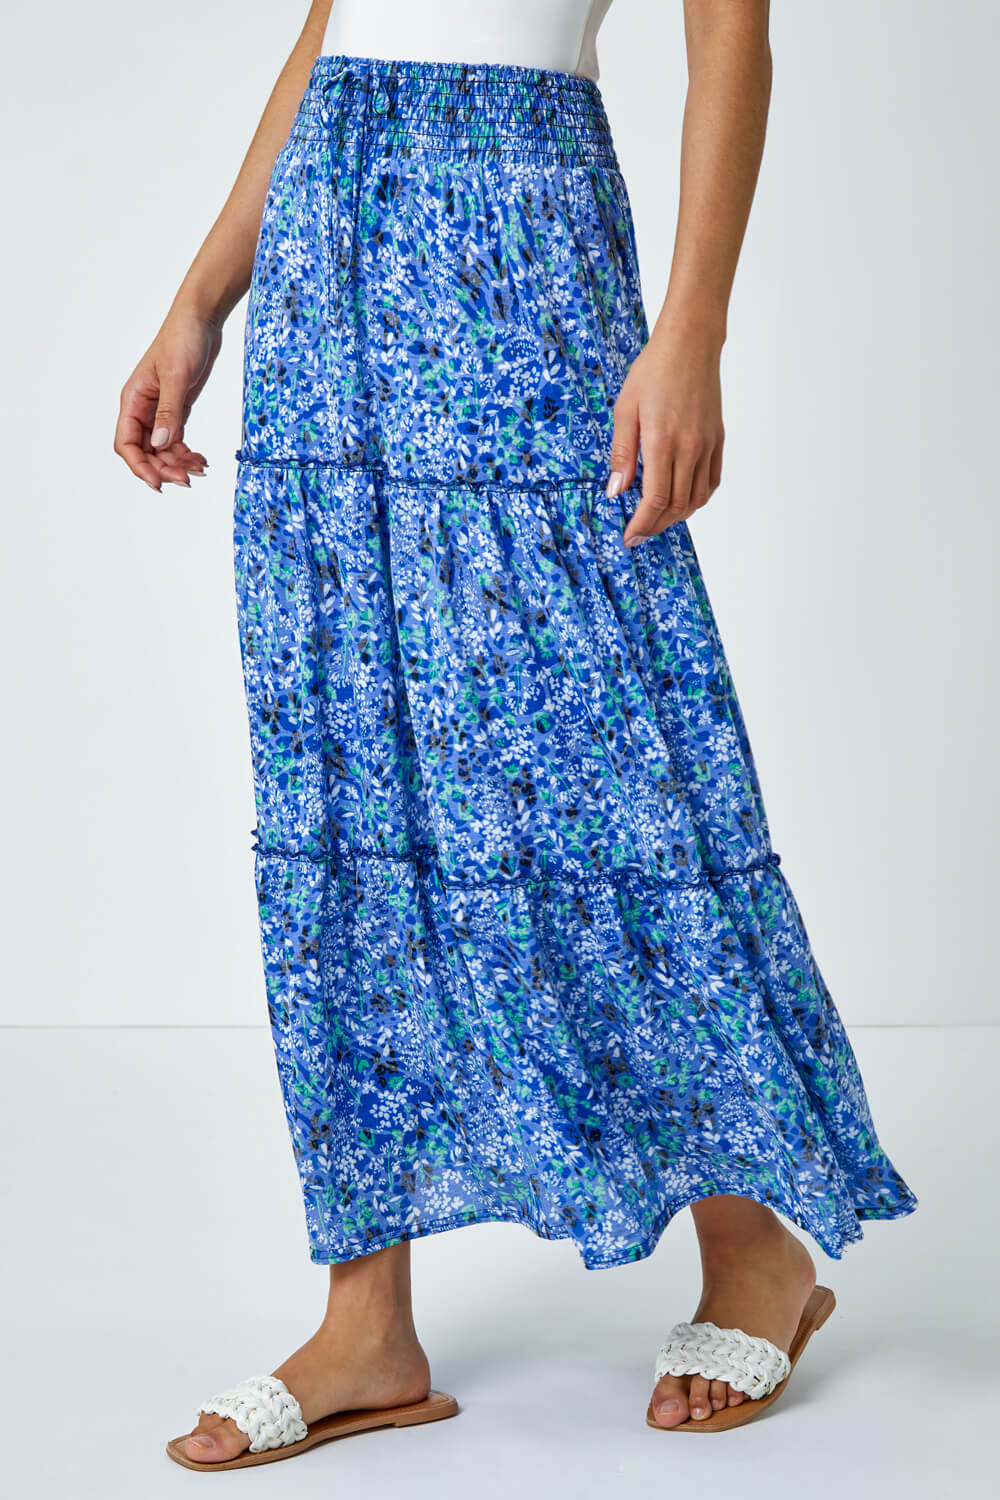 Blue Ditsy Floral Print Tiered Maxi Skirt, Image 4 of 5